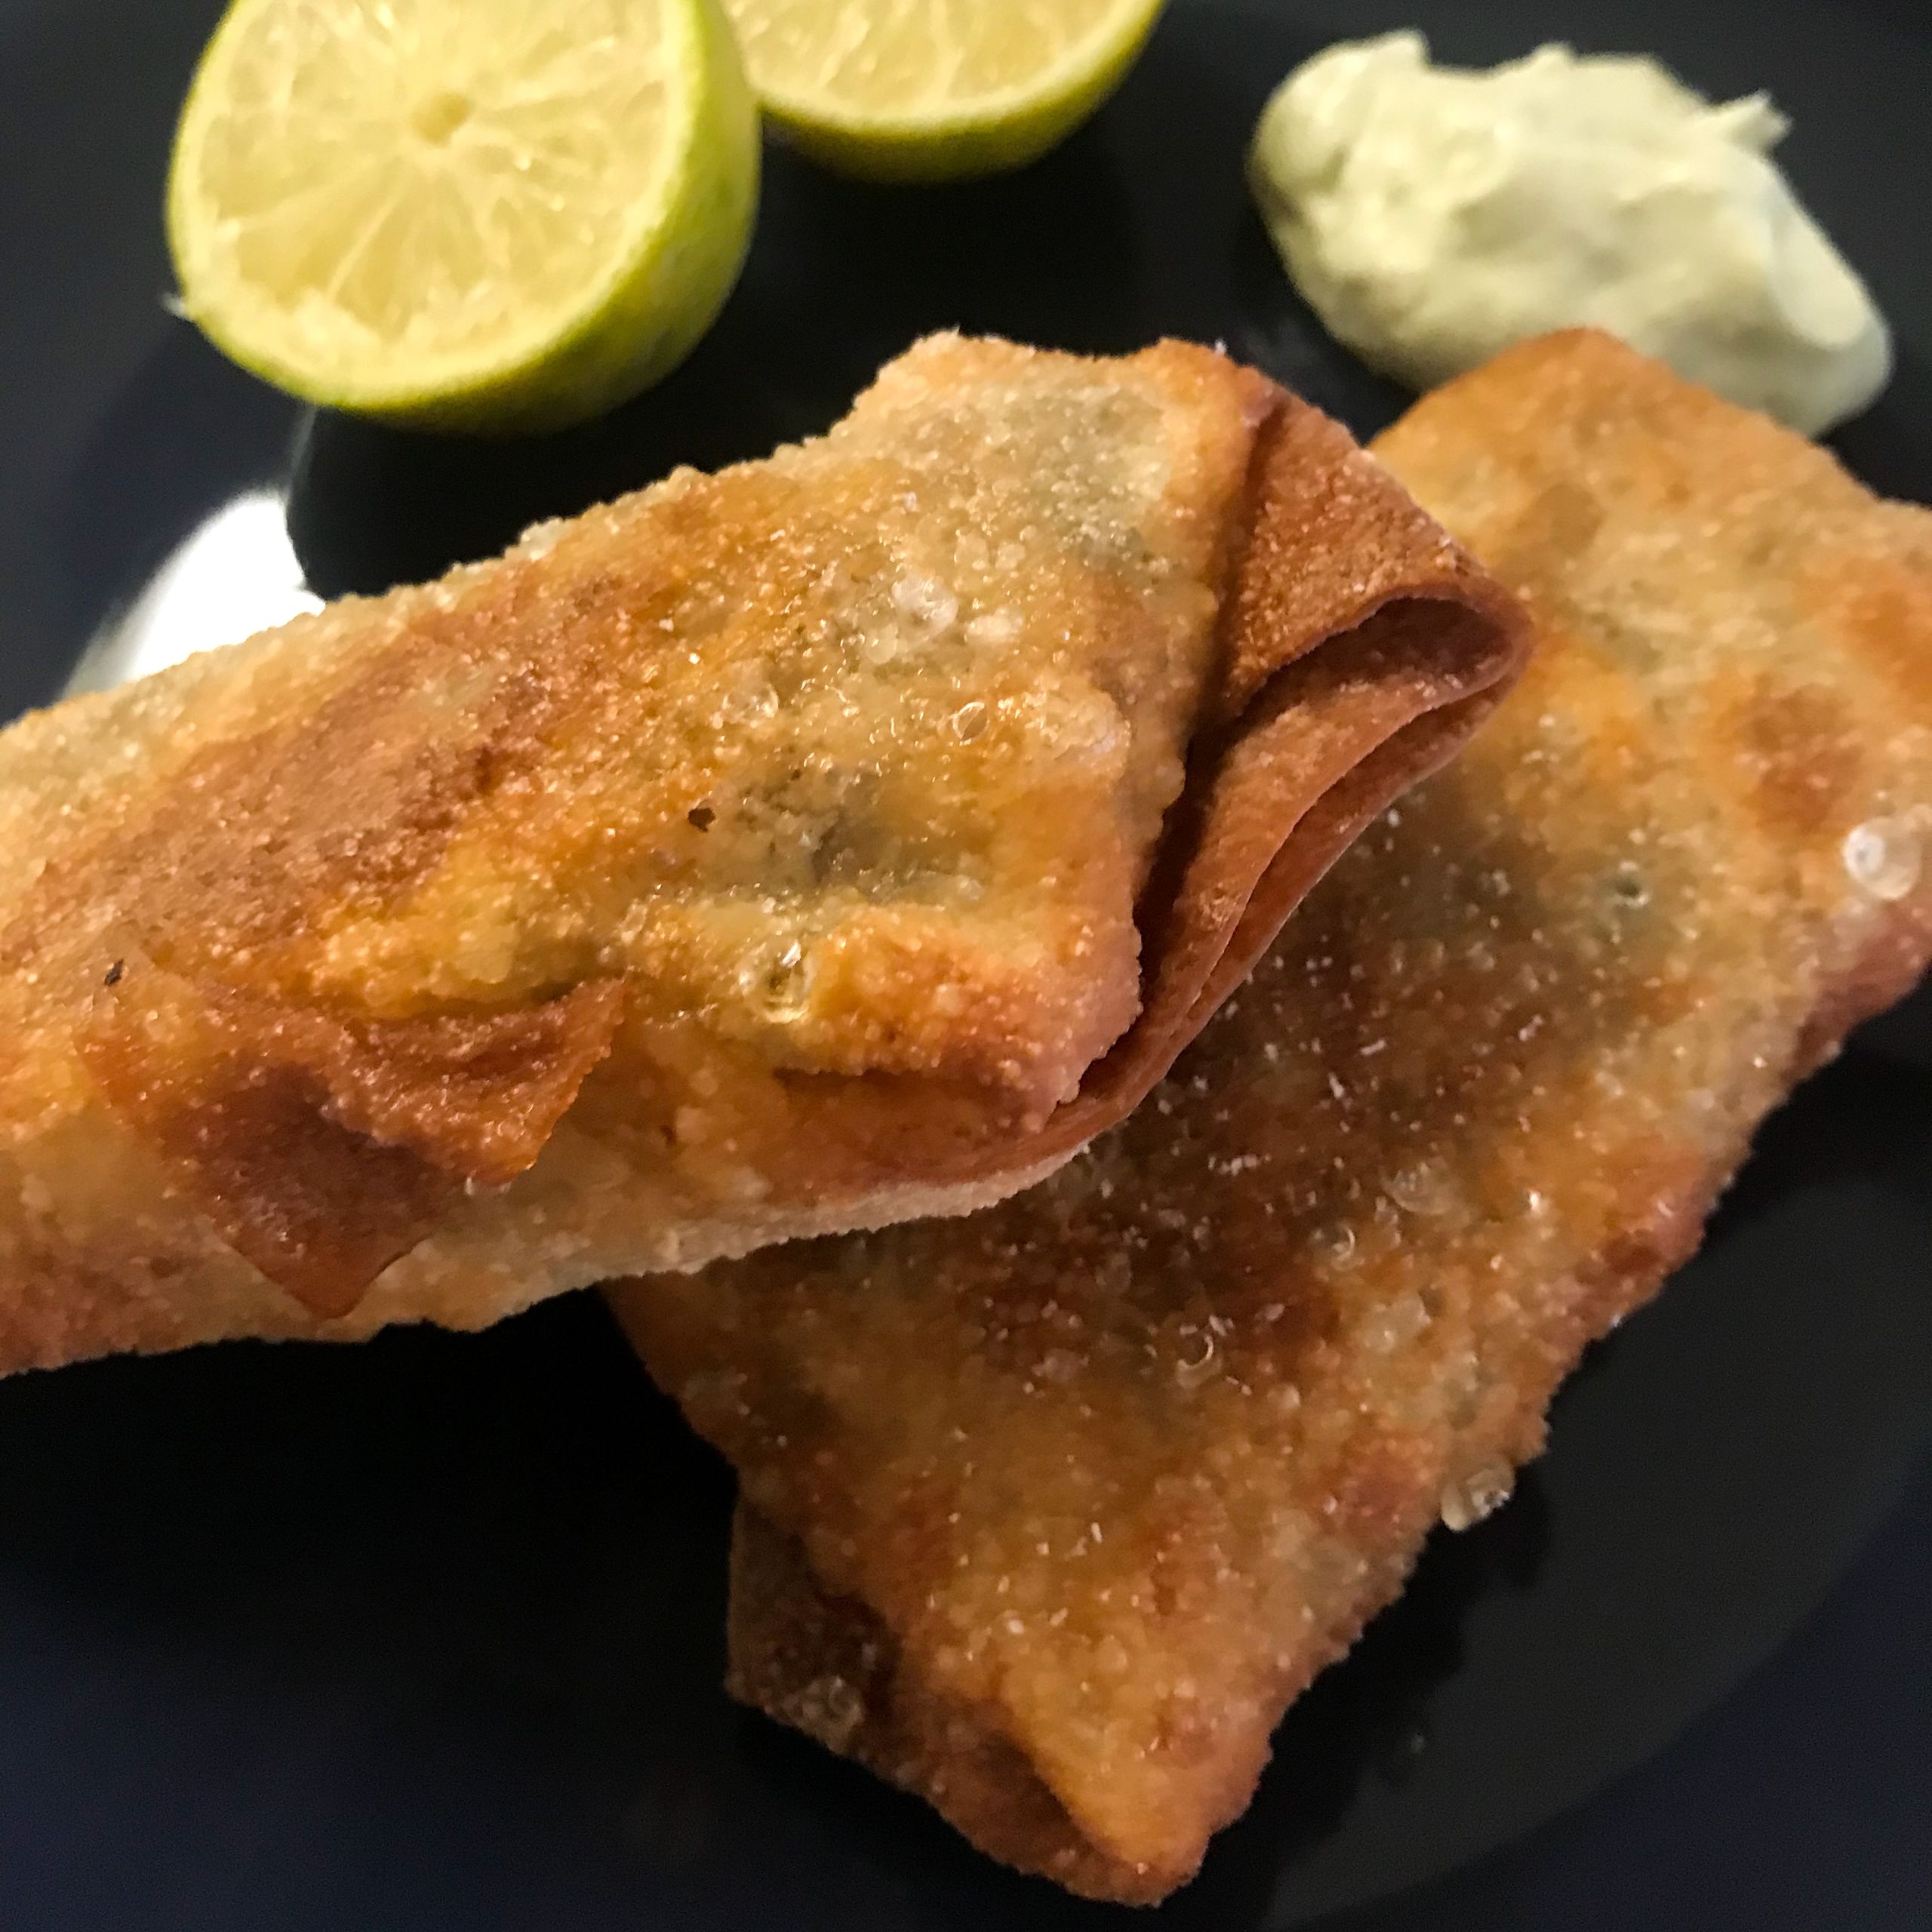 Cooked Southwest Egg rolls on plate with lime avocado crema and cut limes | my curated tastes